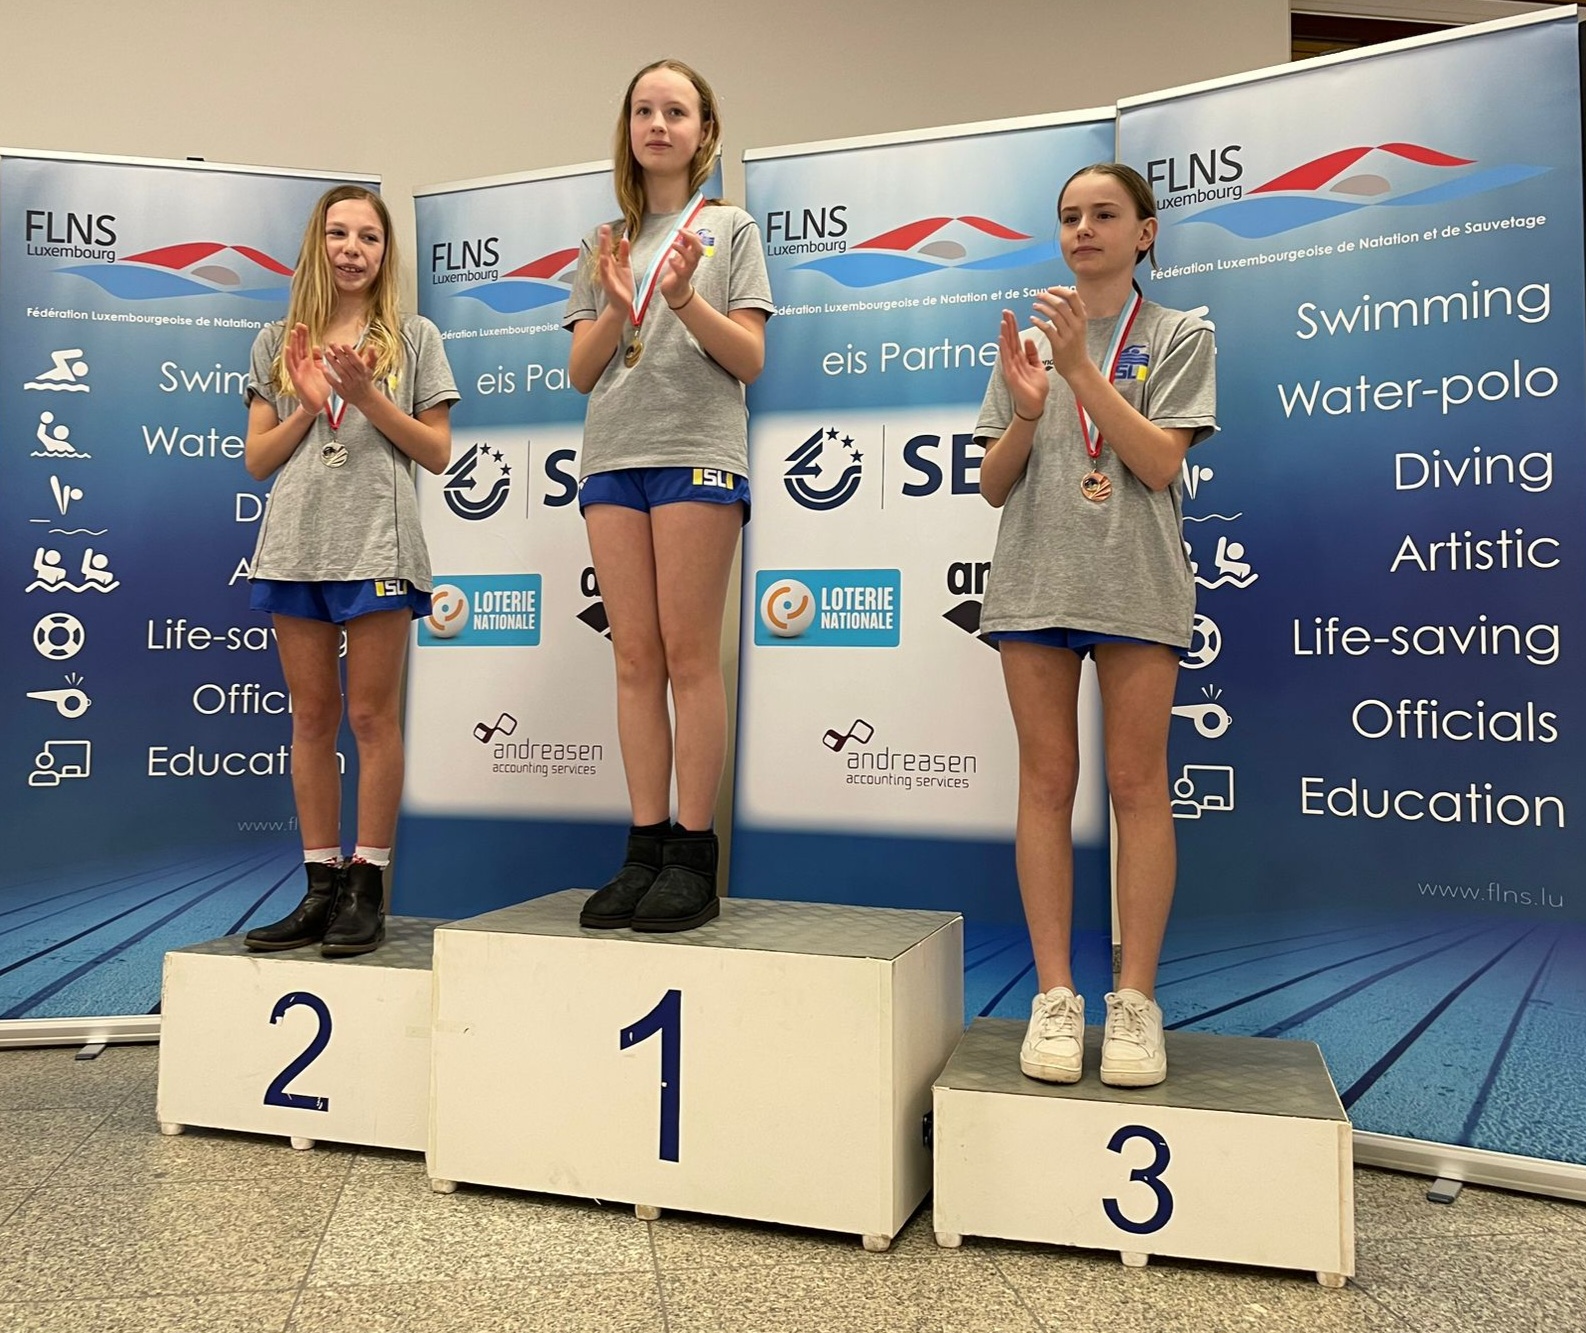 🎉Amazing results of our Artistic Swimming Group at the Grand Prix de l’Avenir🏅